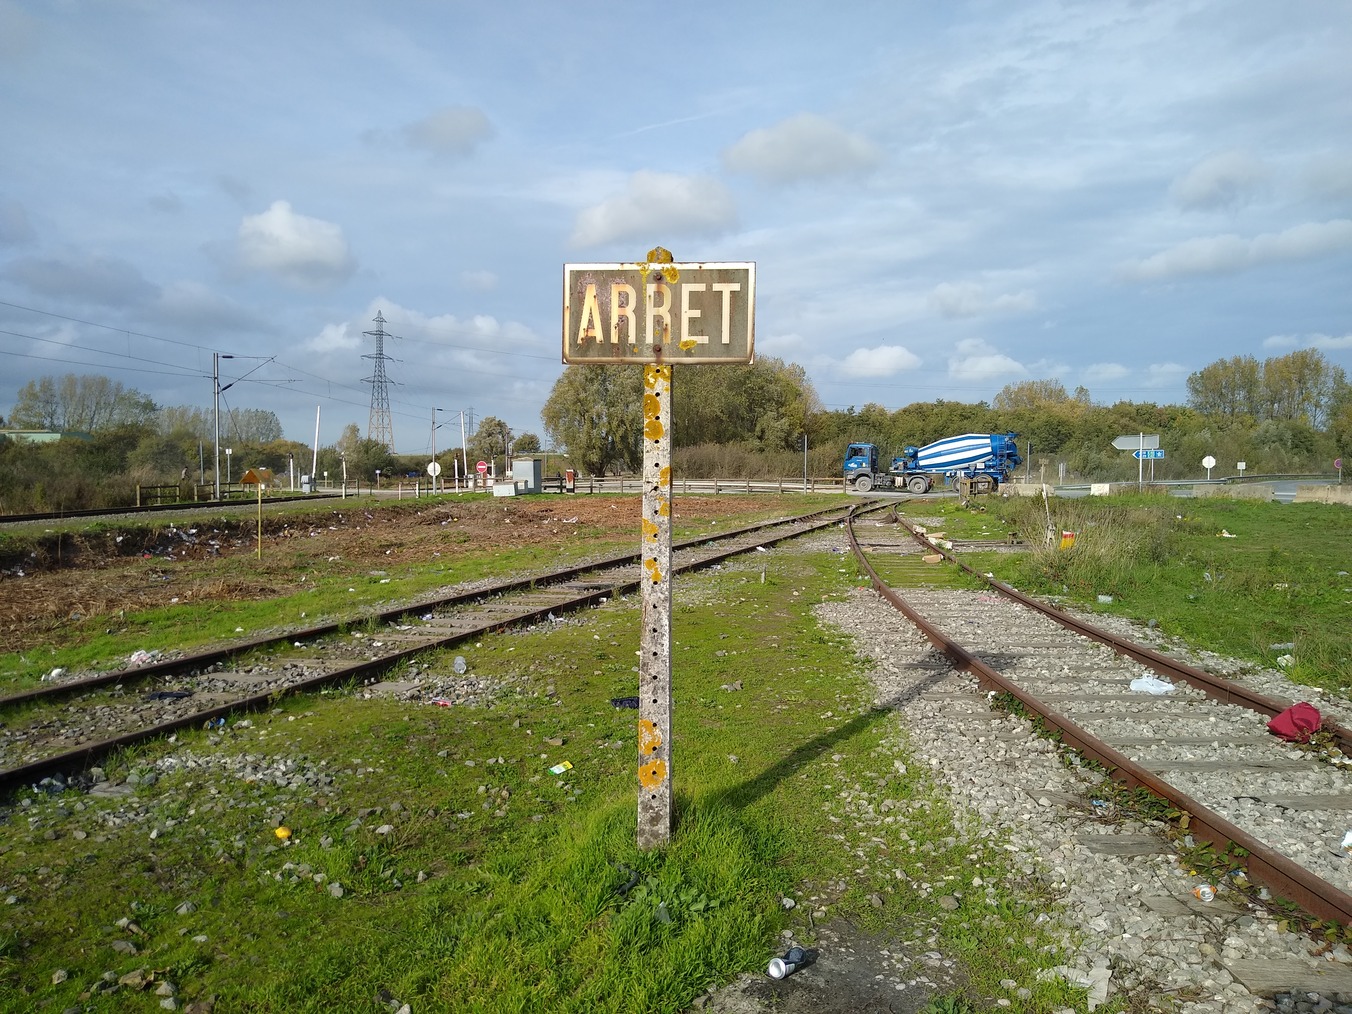 The refugee camp in Grande-Synthe lies next to a railway junction. Photo: Steven MacKenzie